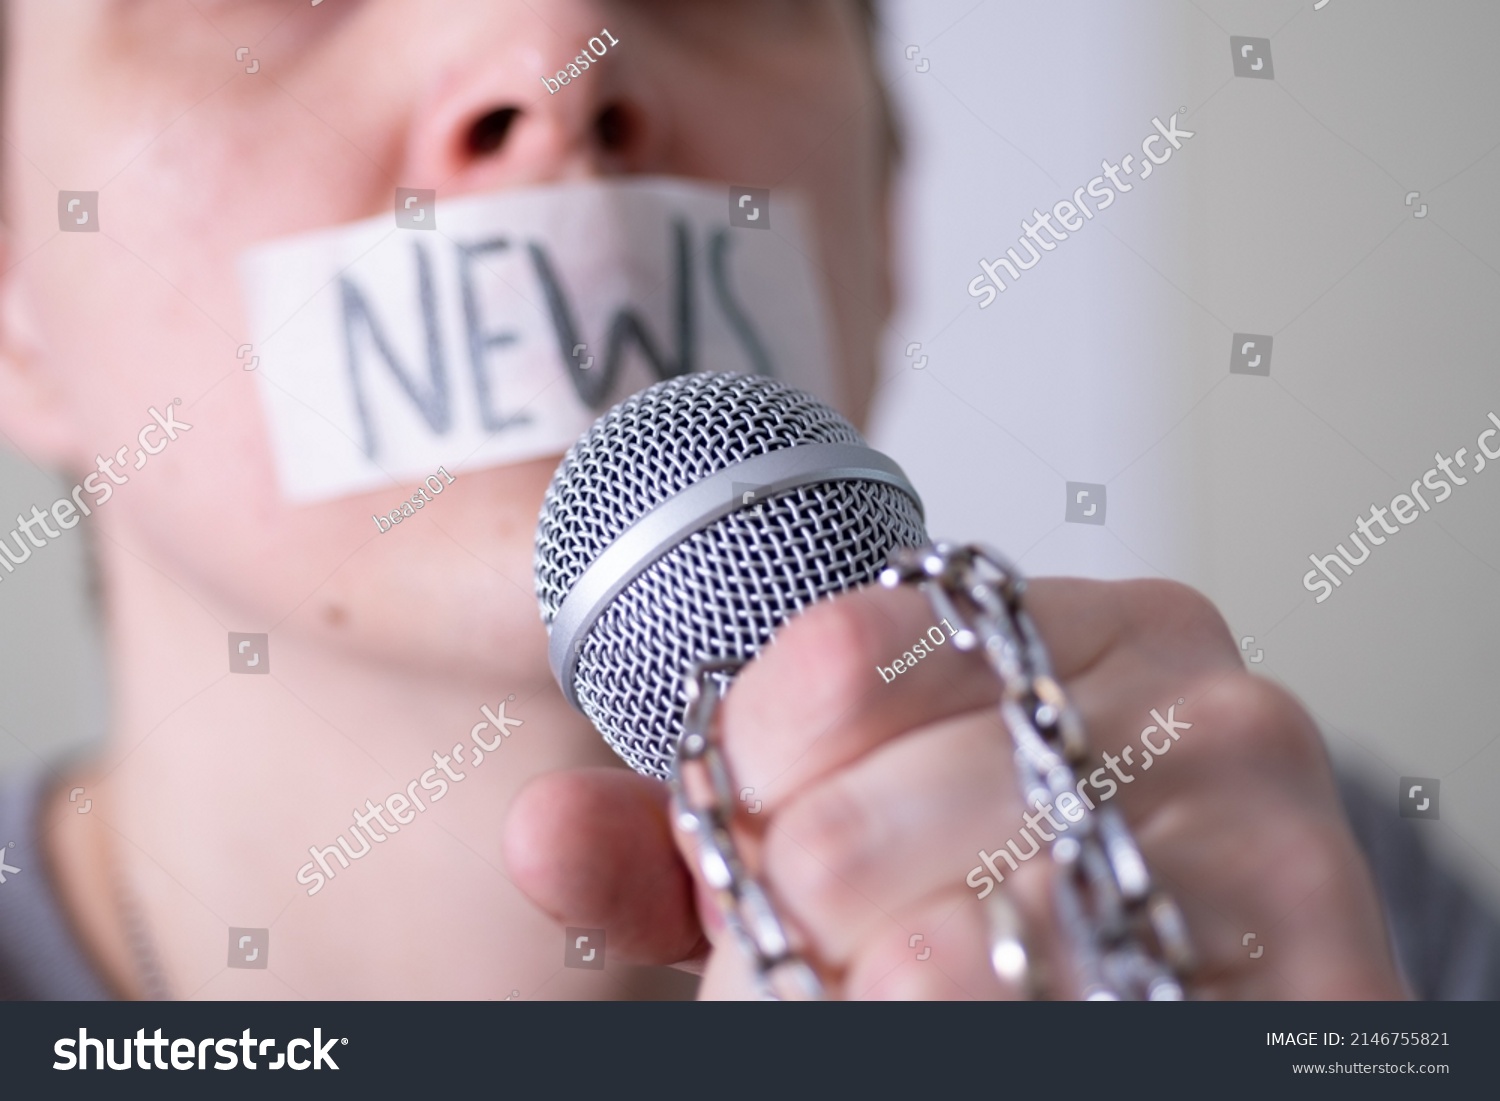 A man gags his mouth with duct tape saying news trying to speak into a microphone. The concept of World Press Freedom Day. #2146755821